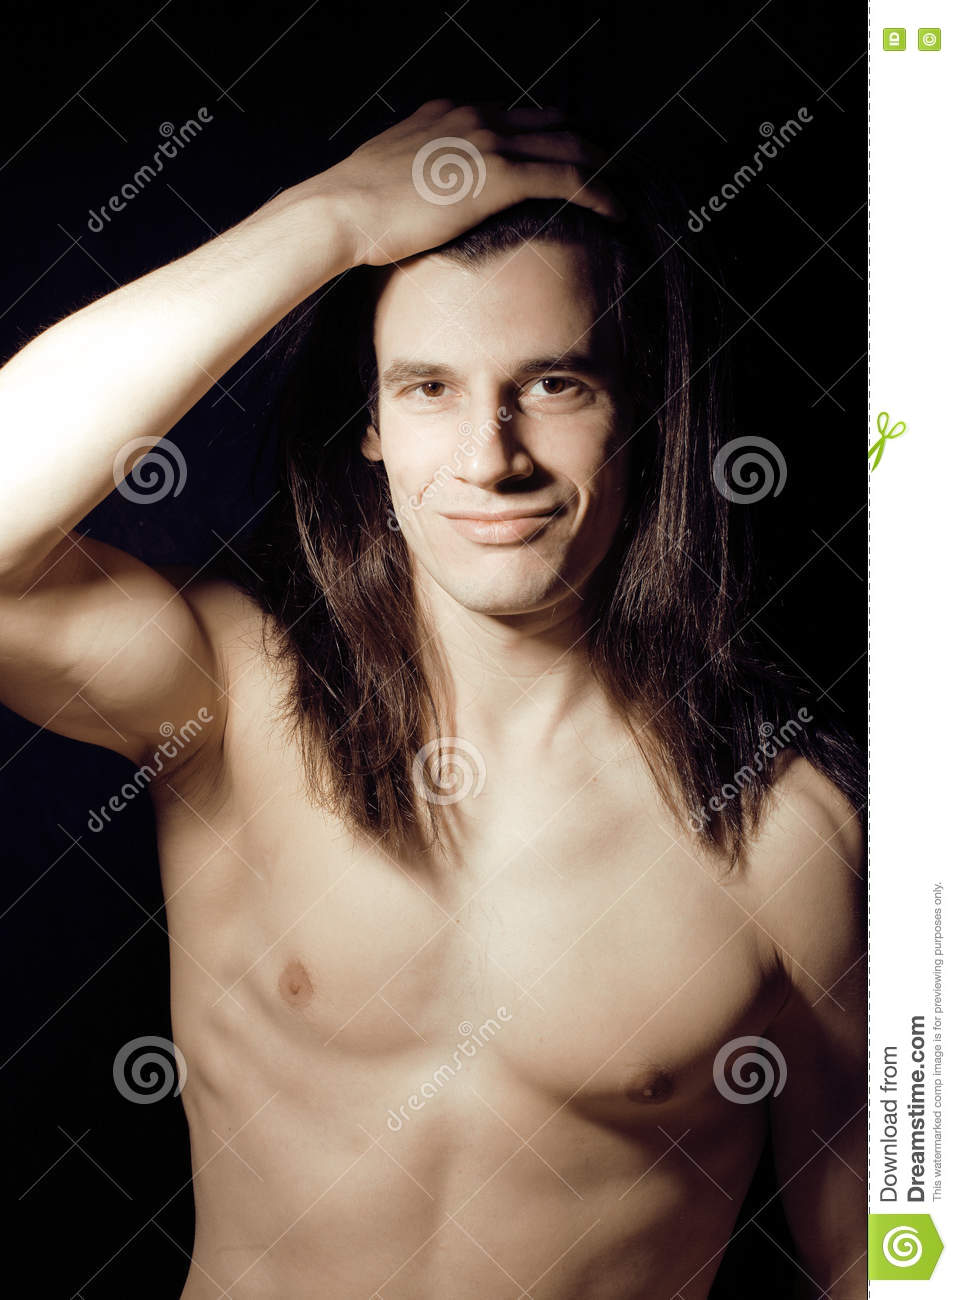 best of With naked dark Man long hair